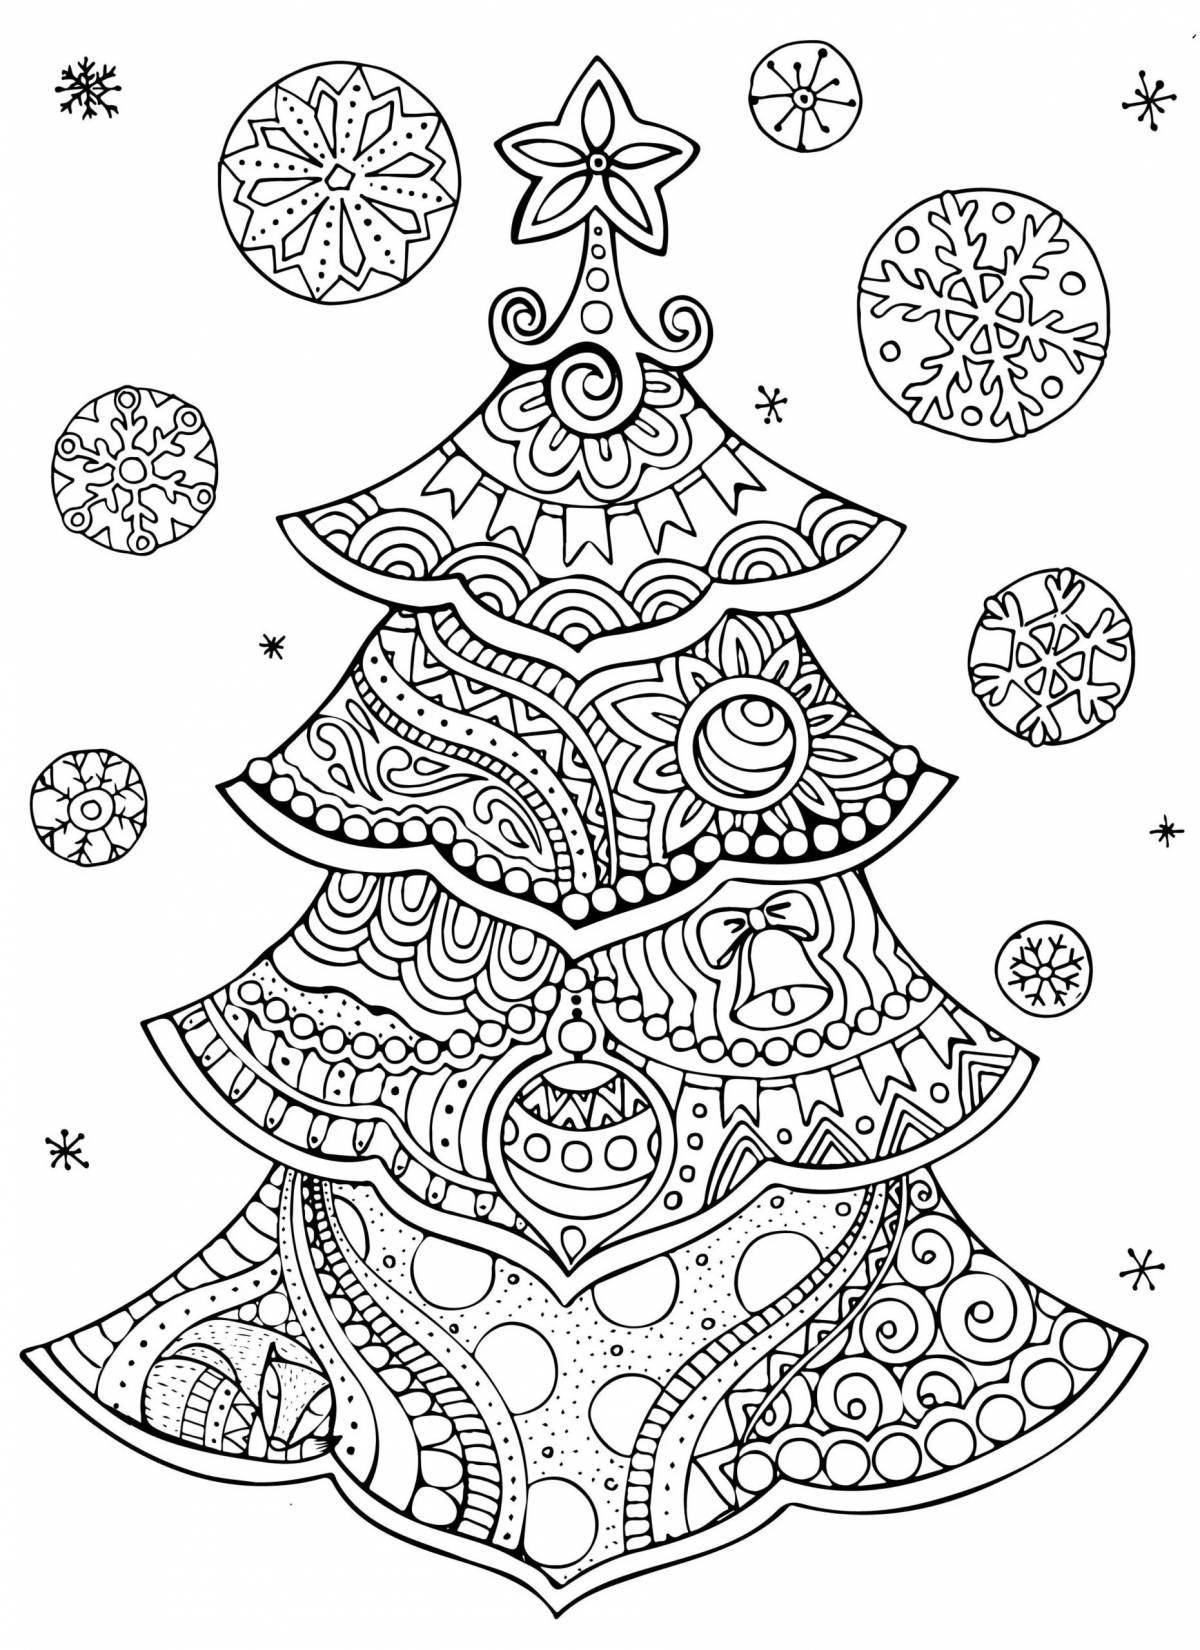 Exciting Christmas anti-stress coloring book